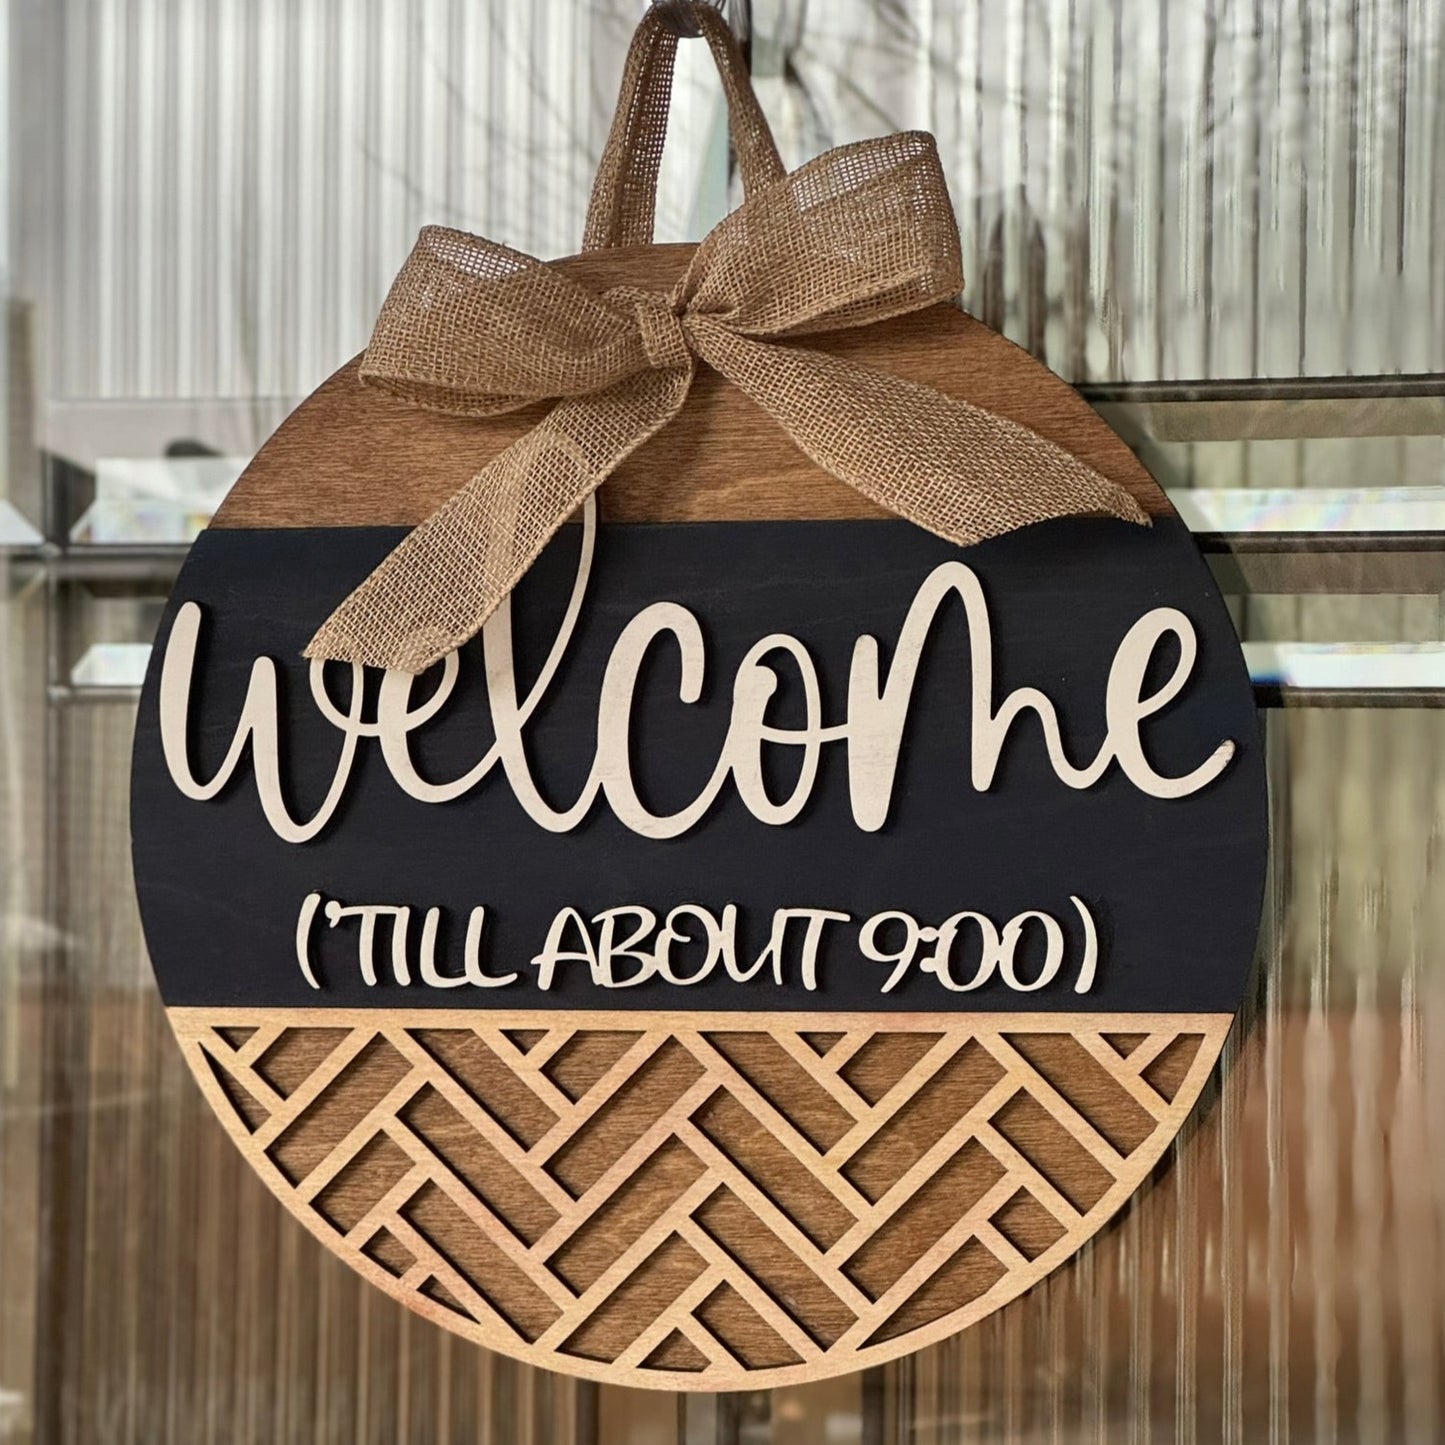 Welcome Until 9 Porch Sign